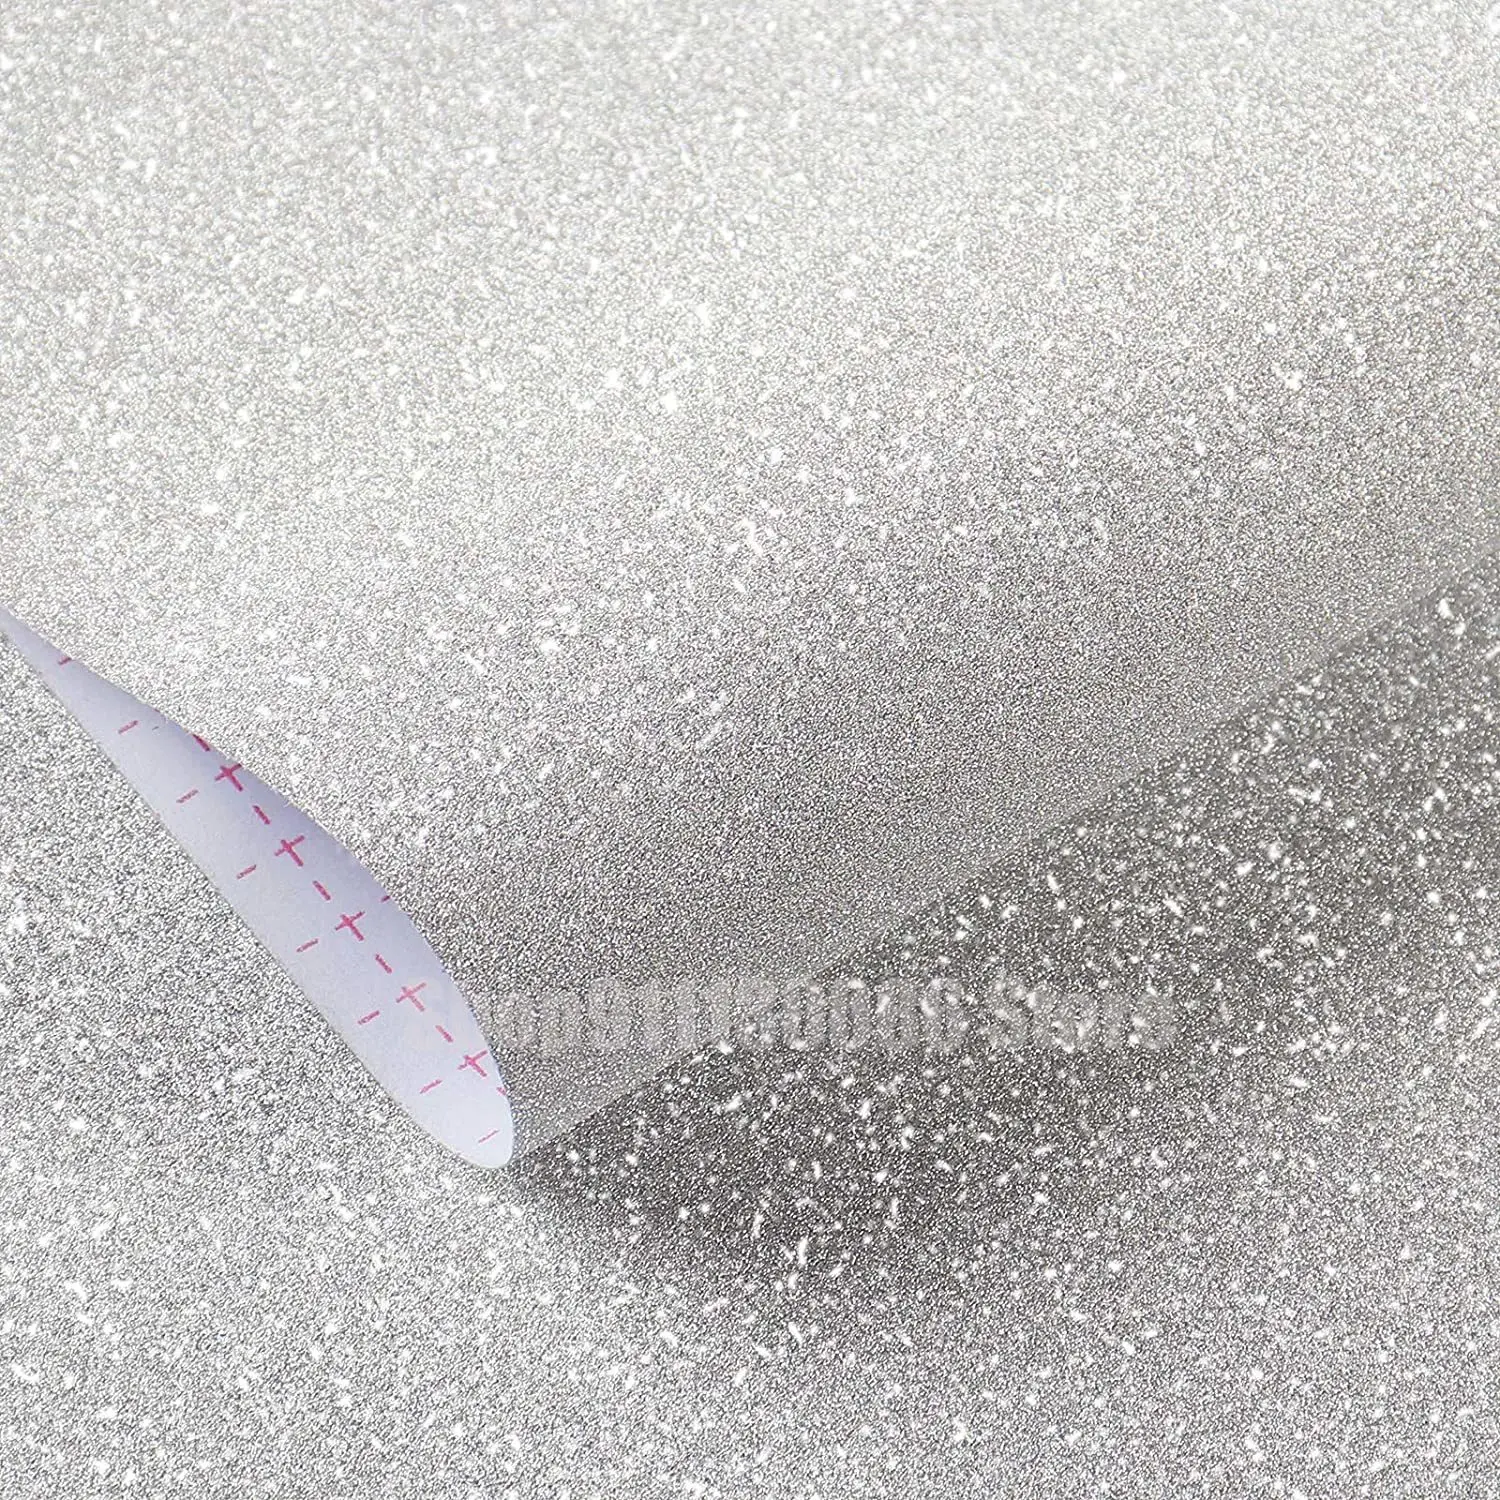 Glitter PVC Self Adhesive Removable Waterproof Wallpaper Decorative Wall Stickers Furniture Decorative Film Packed Paper